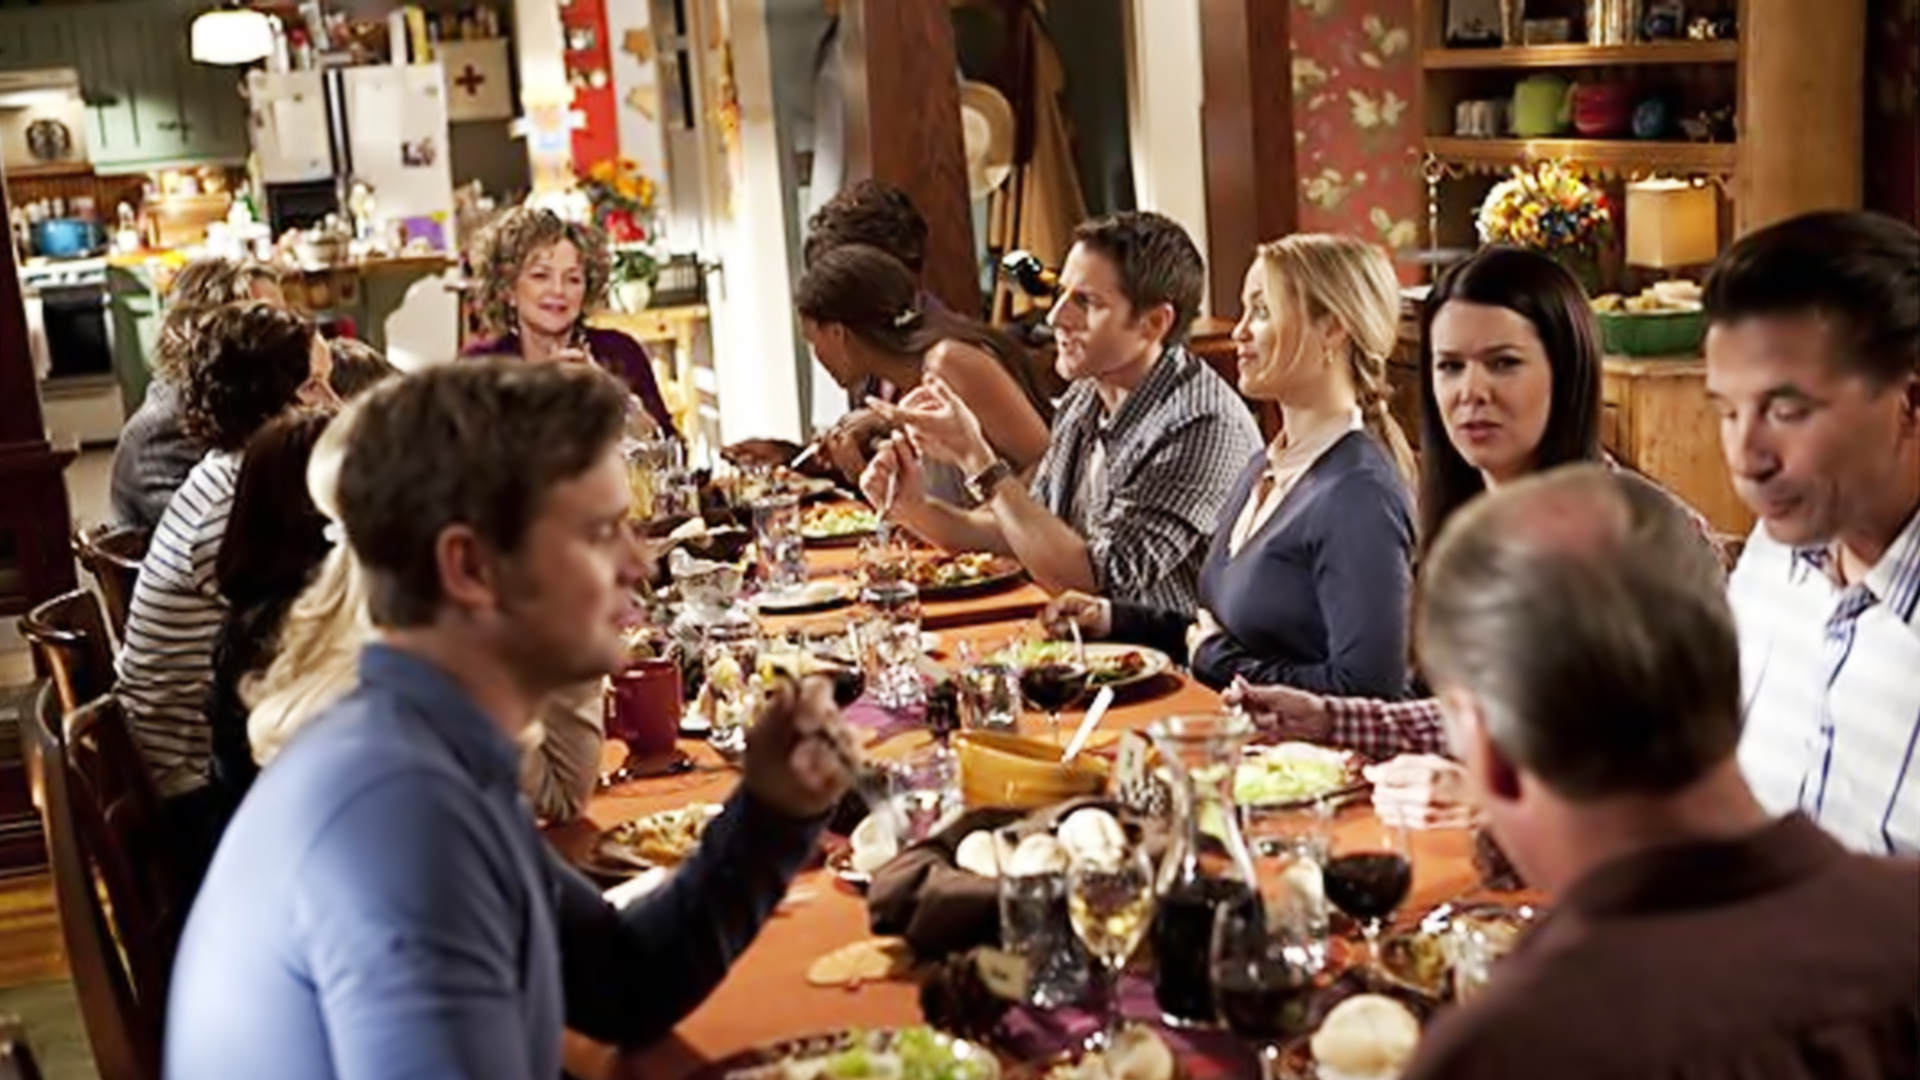 Thanksgiving Dining Room Decor According To Our Favourite TV Shows 4